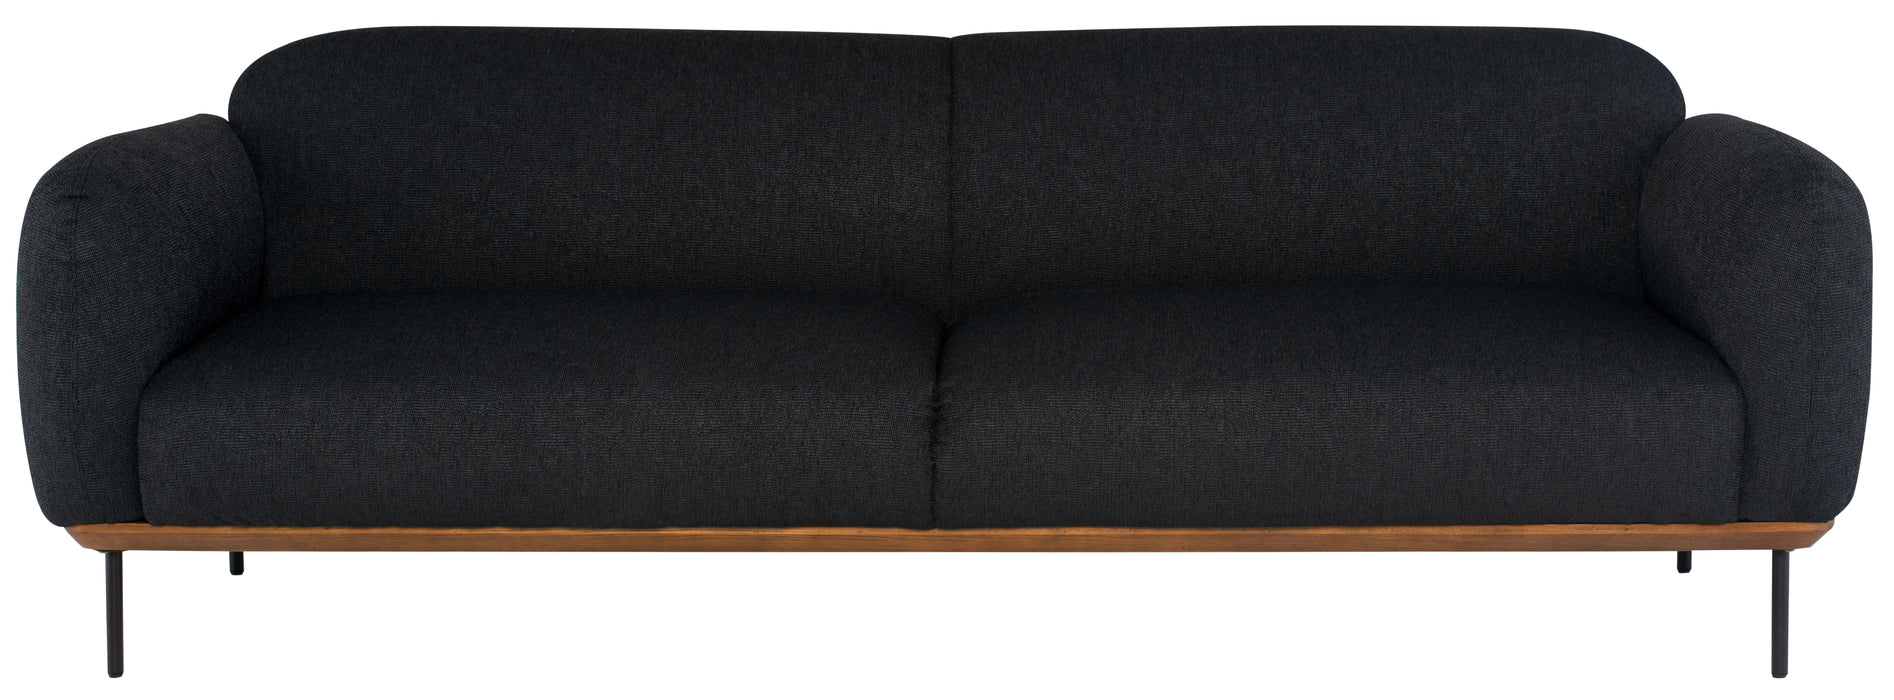 Benson NL Activated Charcoal Triple Seat Sofa